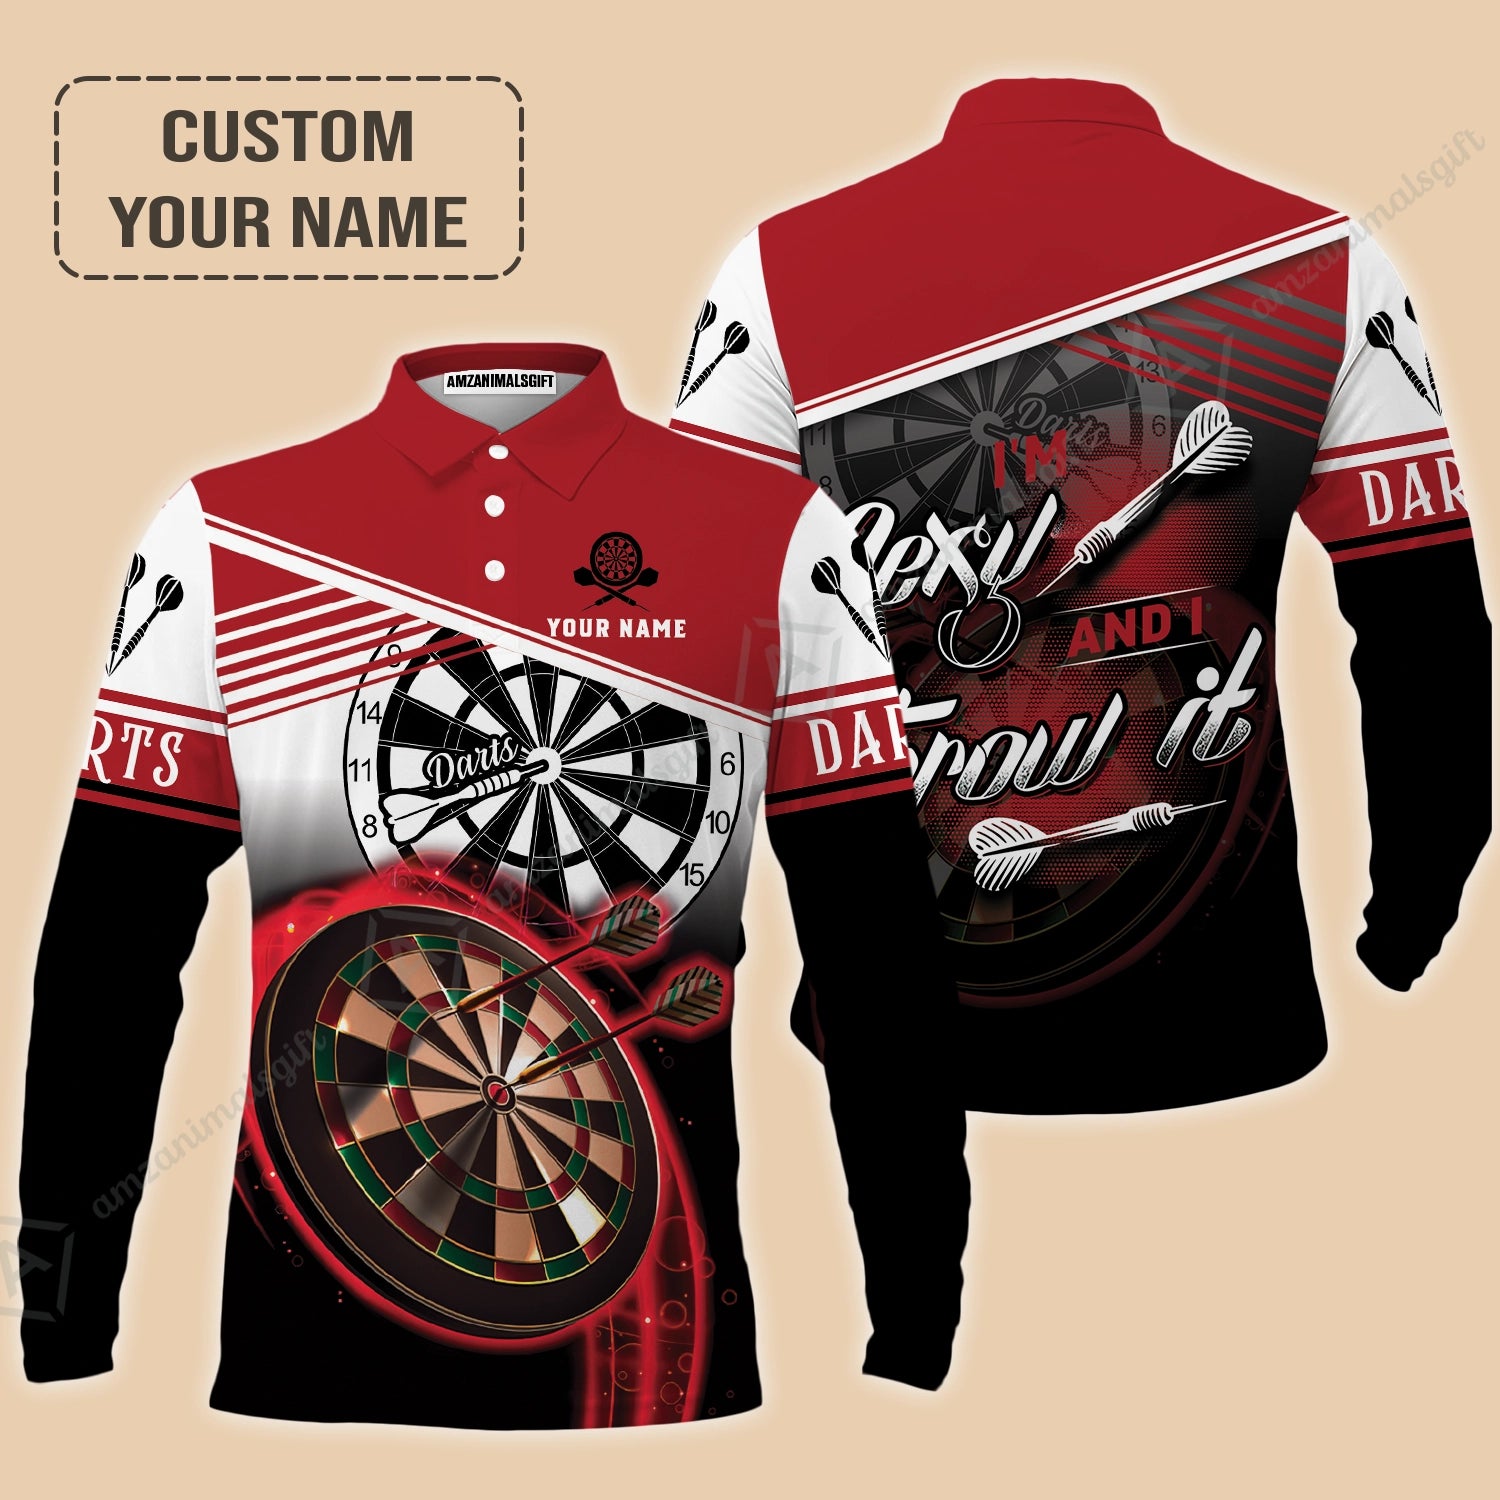 Personalized Darts Long Polo Shirt, Darts Red Color Custom Polo Shirt I'm Sexy And I Throw It, Outfits For Darts Players, Darts Team